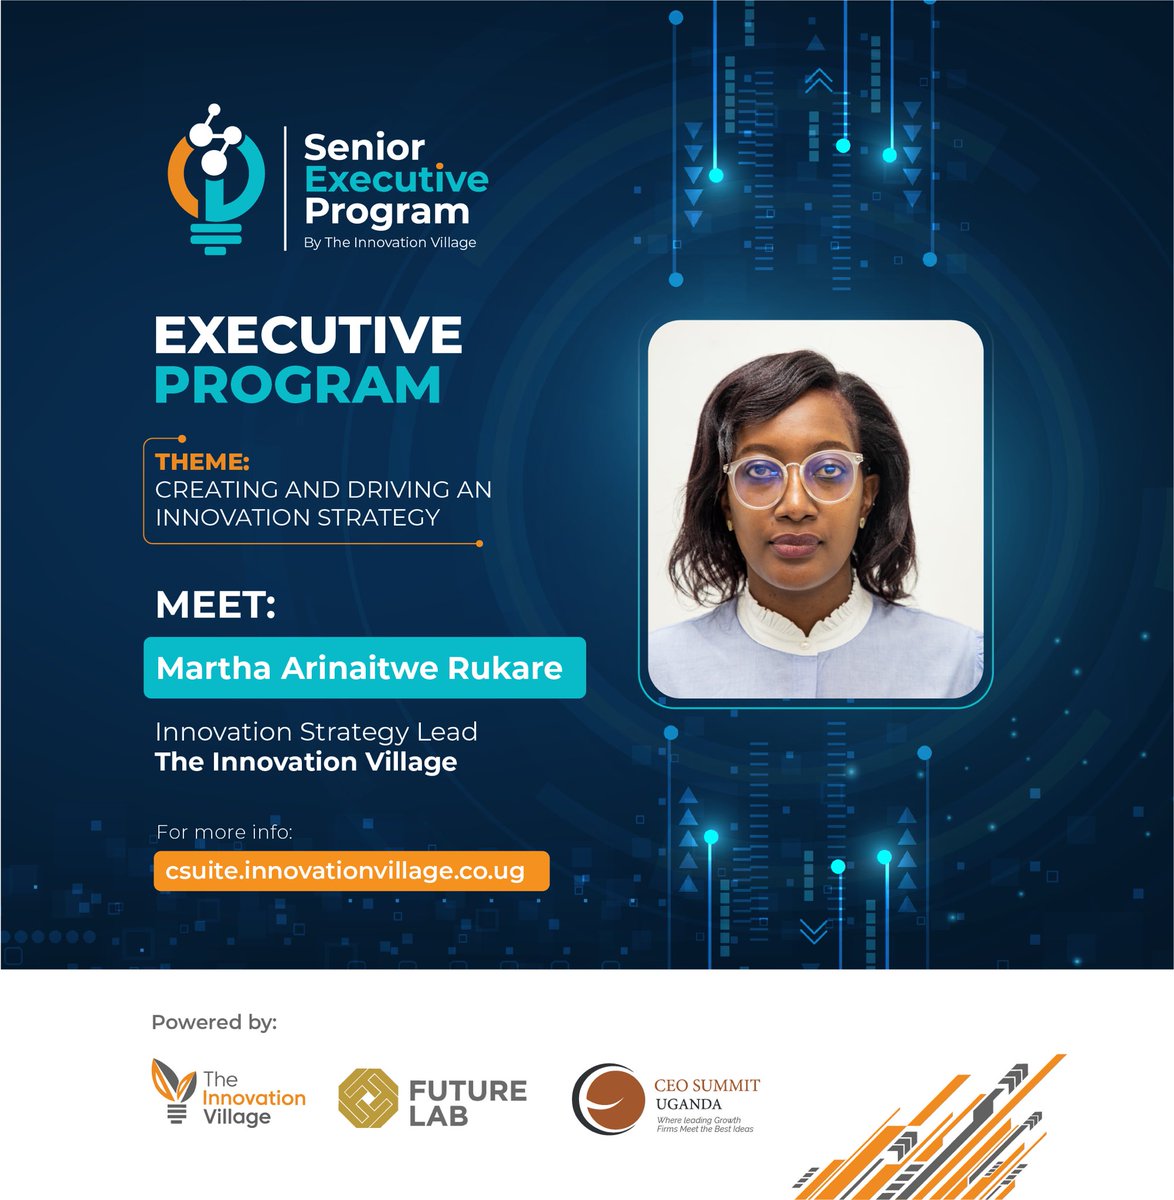 We are excited to have the brilliant innovation strategist @Marlzaar our one of our lead instructors for the #Executiveprogram. The session will focus on aspects of building an innovation culture in your company. Have you booked your slot yet? csuite.innovationvillage.co.ug